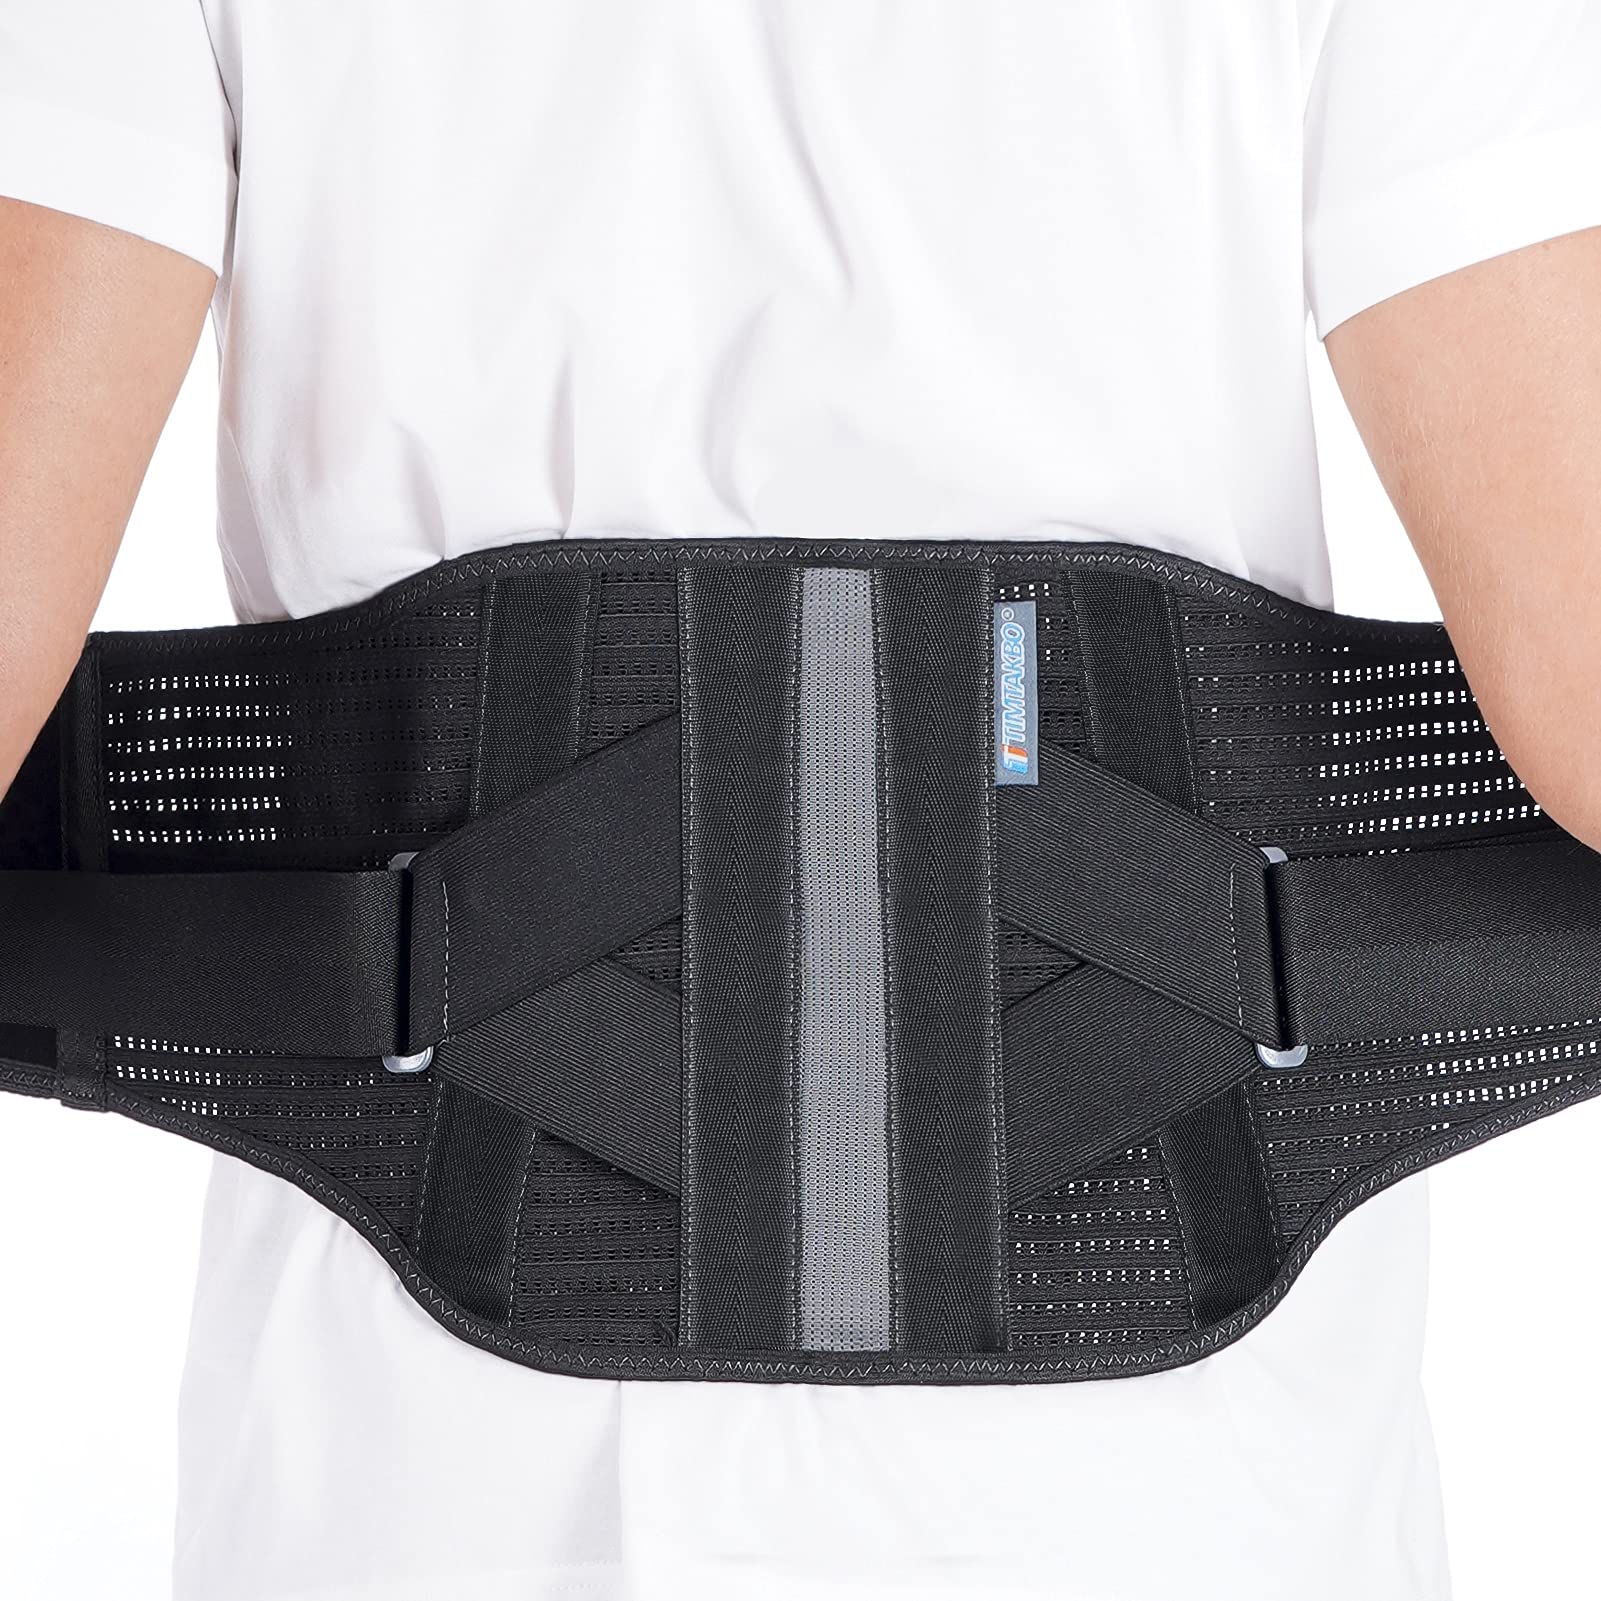 Lower Back Brace for Pain Relief Back Brace Back Support Belt Flexible Lumbar  Support Back Support Brace for Lifting at Work Scoliosis Pain Relief Brace  (Black 2XL Fits 37.5 -47 Belly Waist)